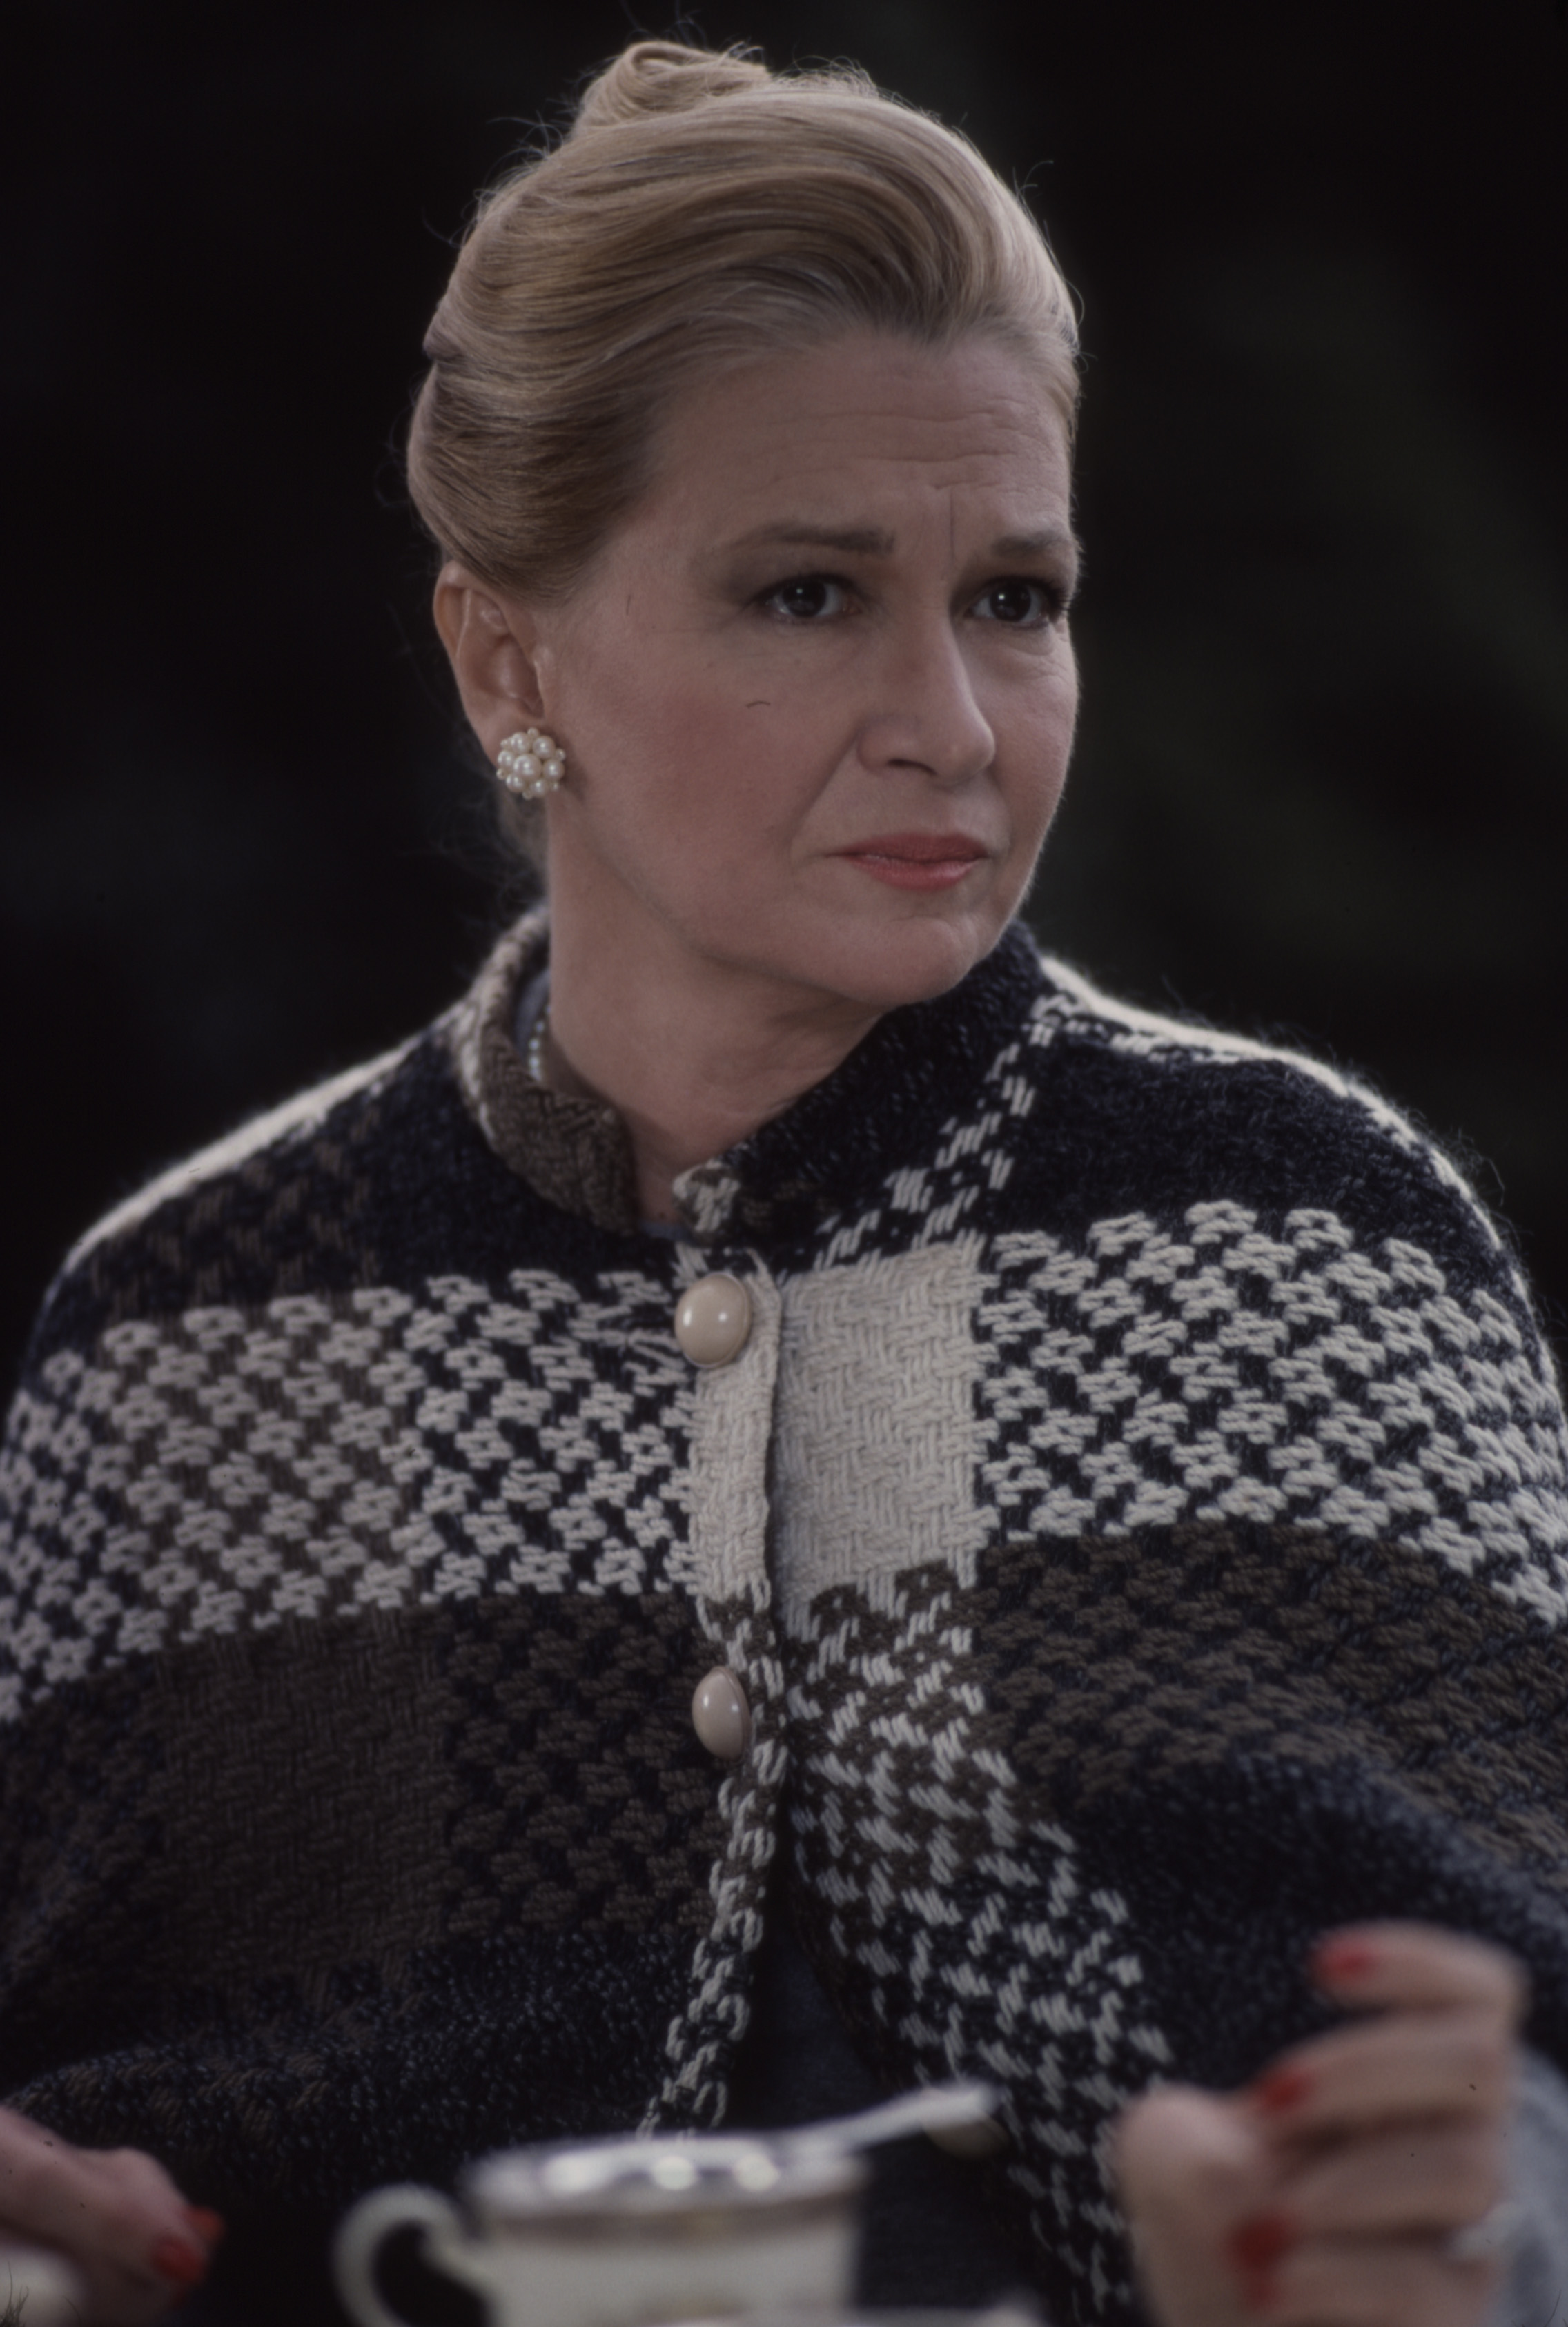 Diane Ladd in "The Grace Kelly Story" in 1983 | Source: Getty Images